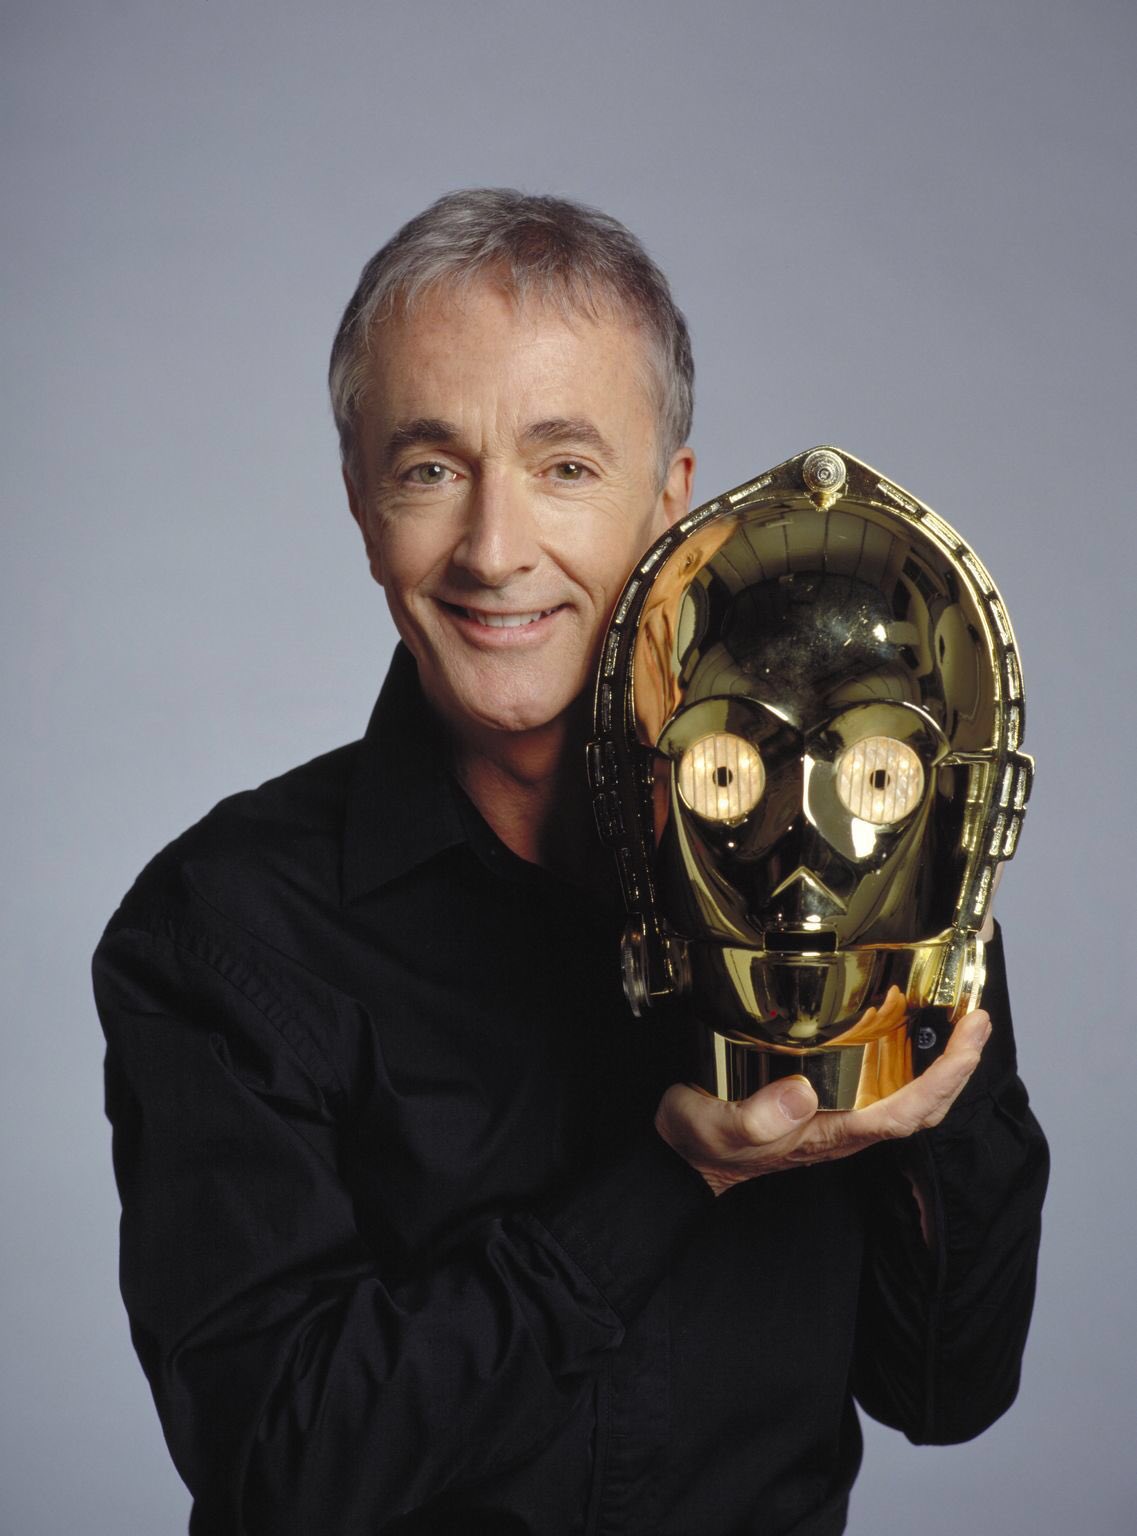 Happy birthday to C-3PO himself Anthony Daniels ( May the Force be with you! 